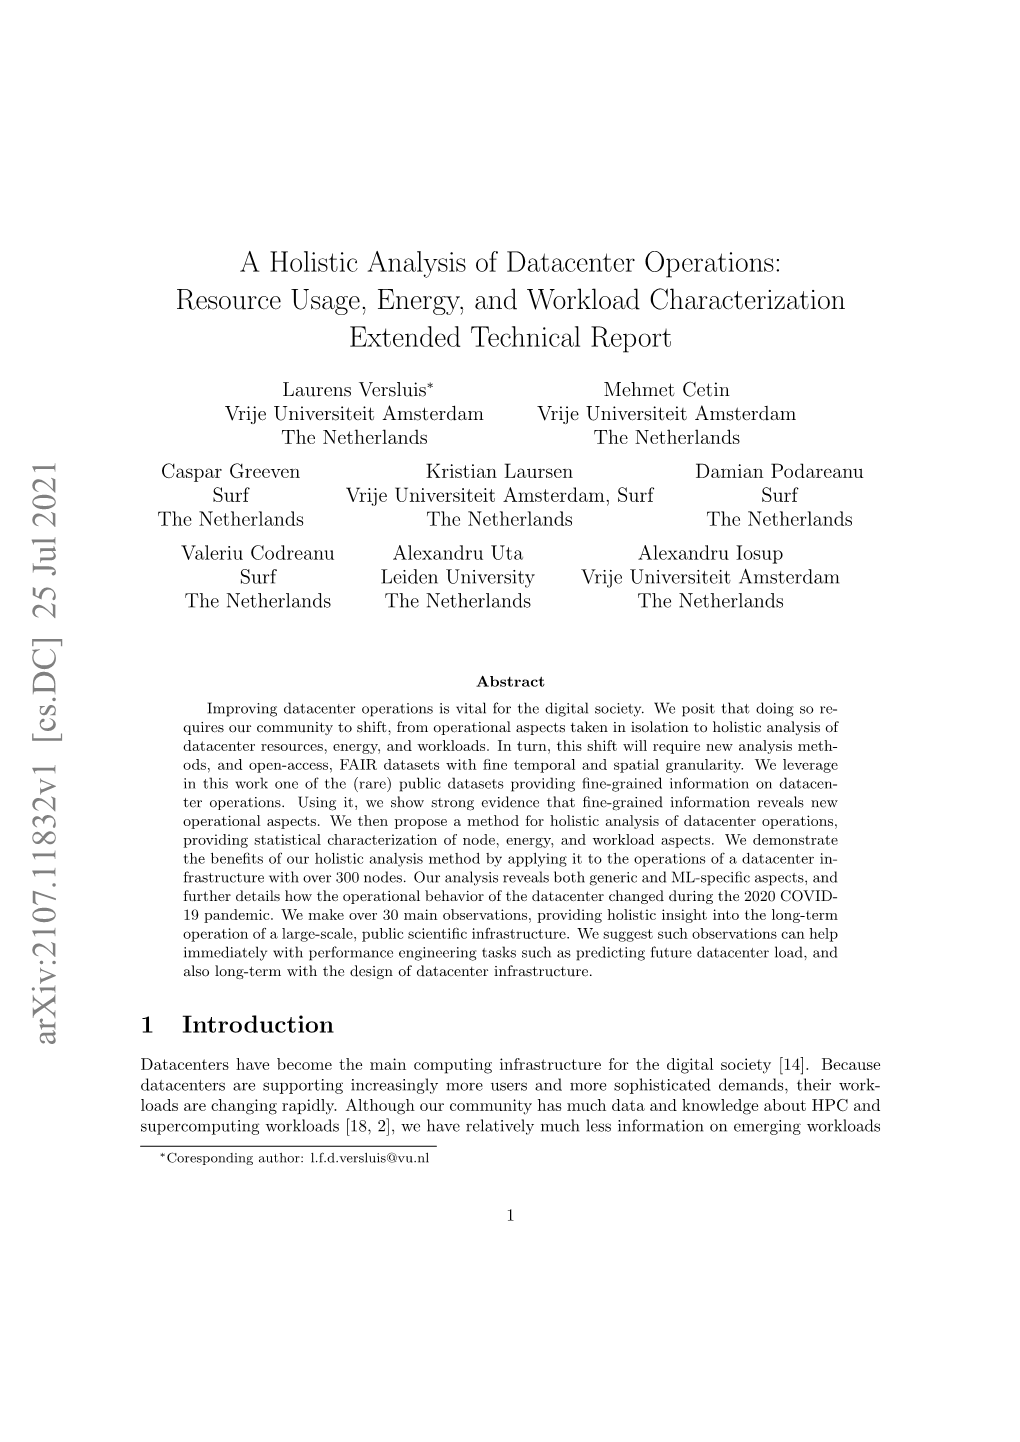 A Holistic Analysis of Datacenter Operations: Resource Usage, Energy, and Workload Characterization Extended Technical Report